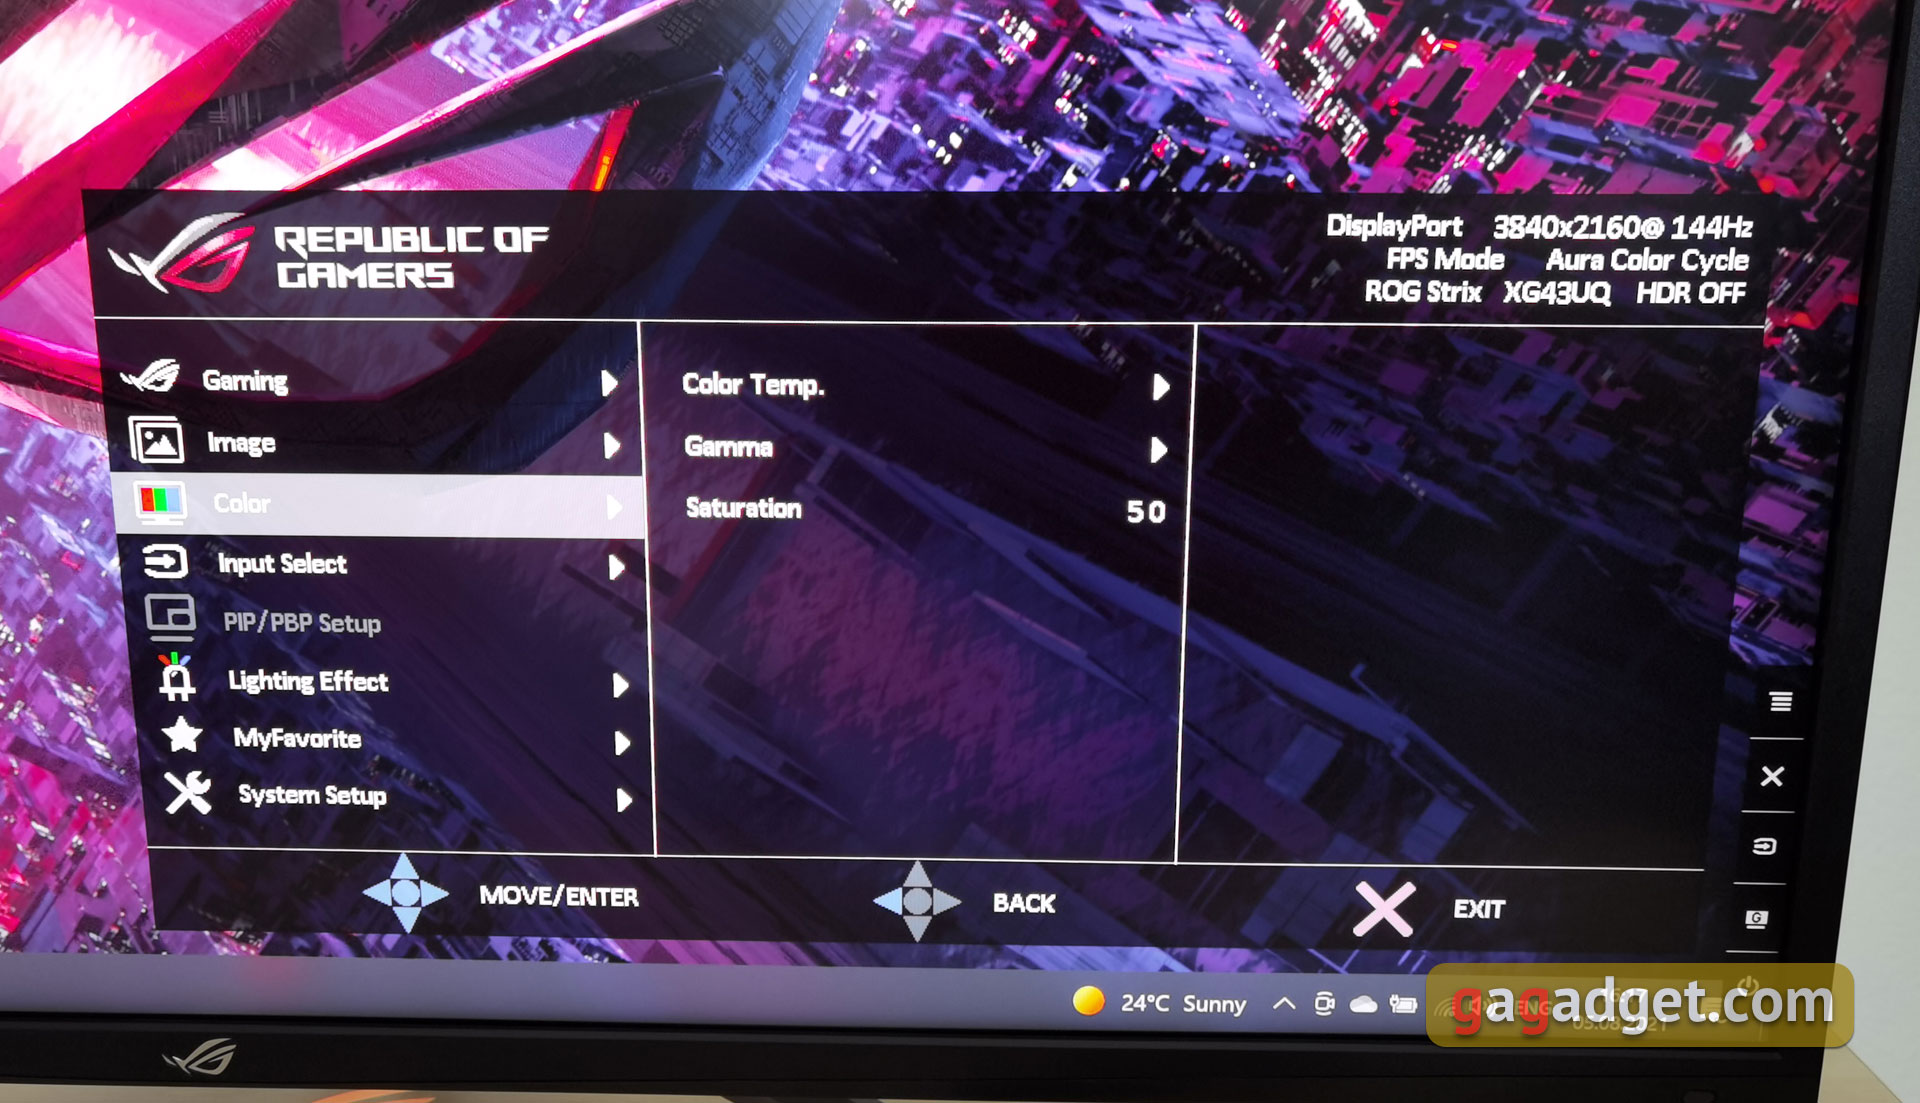 ASUS ROG Strix XG43UQ Overview: The Best Display for Next-Generation Gaming Consoles-38